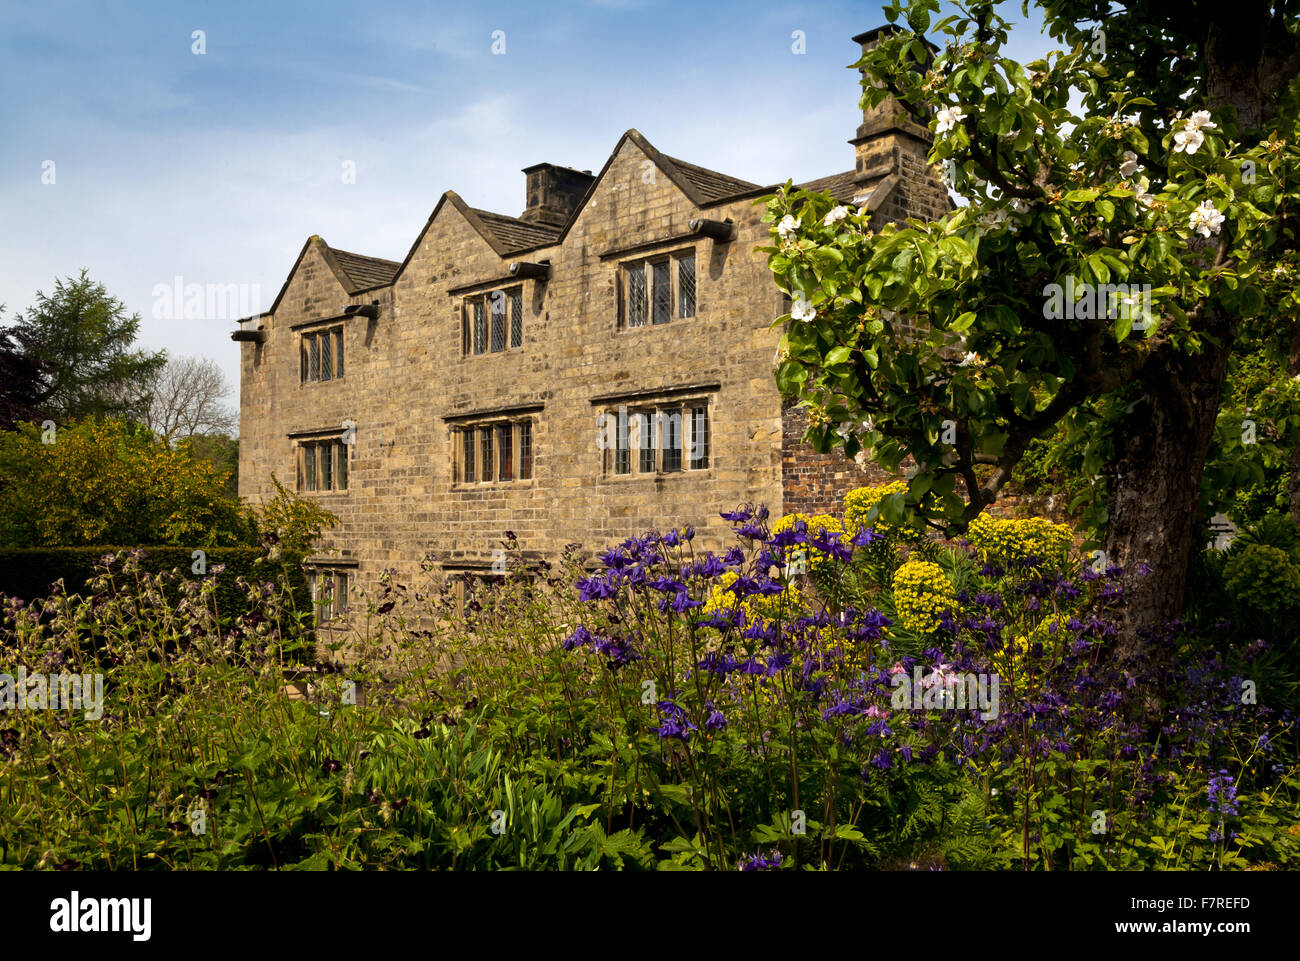 The garden at the front of Eyam Hall and Craft Centre, Derbyshire. Eyam Hall is an unspoilt example of a gritstone Jacobean manor house, set within a walled garden. Stock Photo